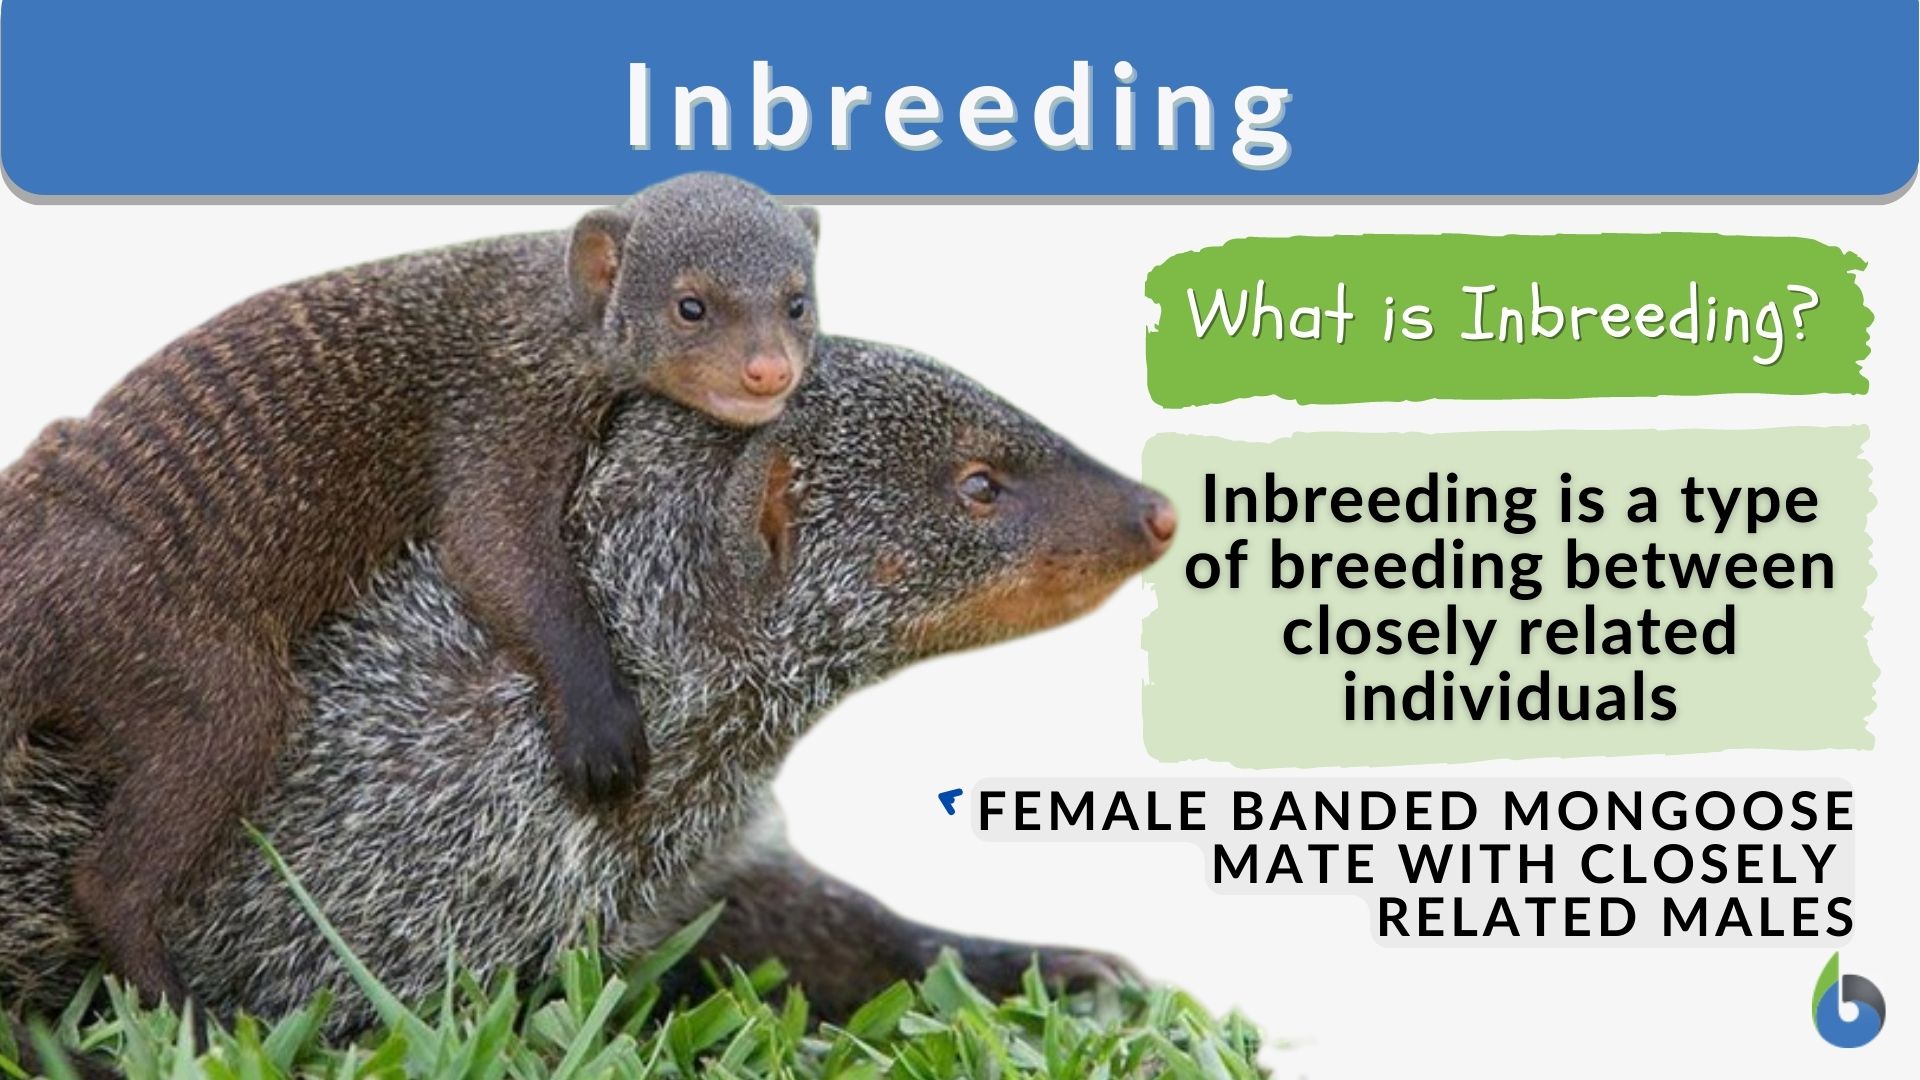 Inbreeding Definition and Examples - Biology Online Dictionary